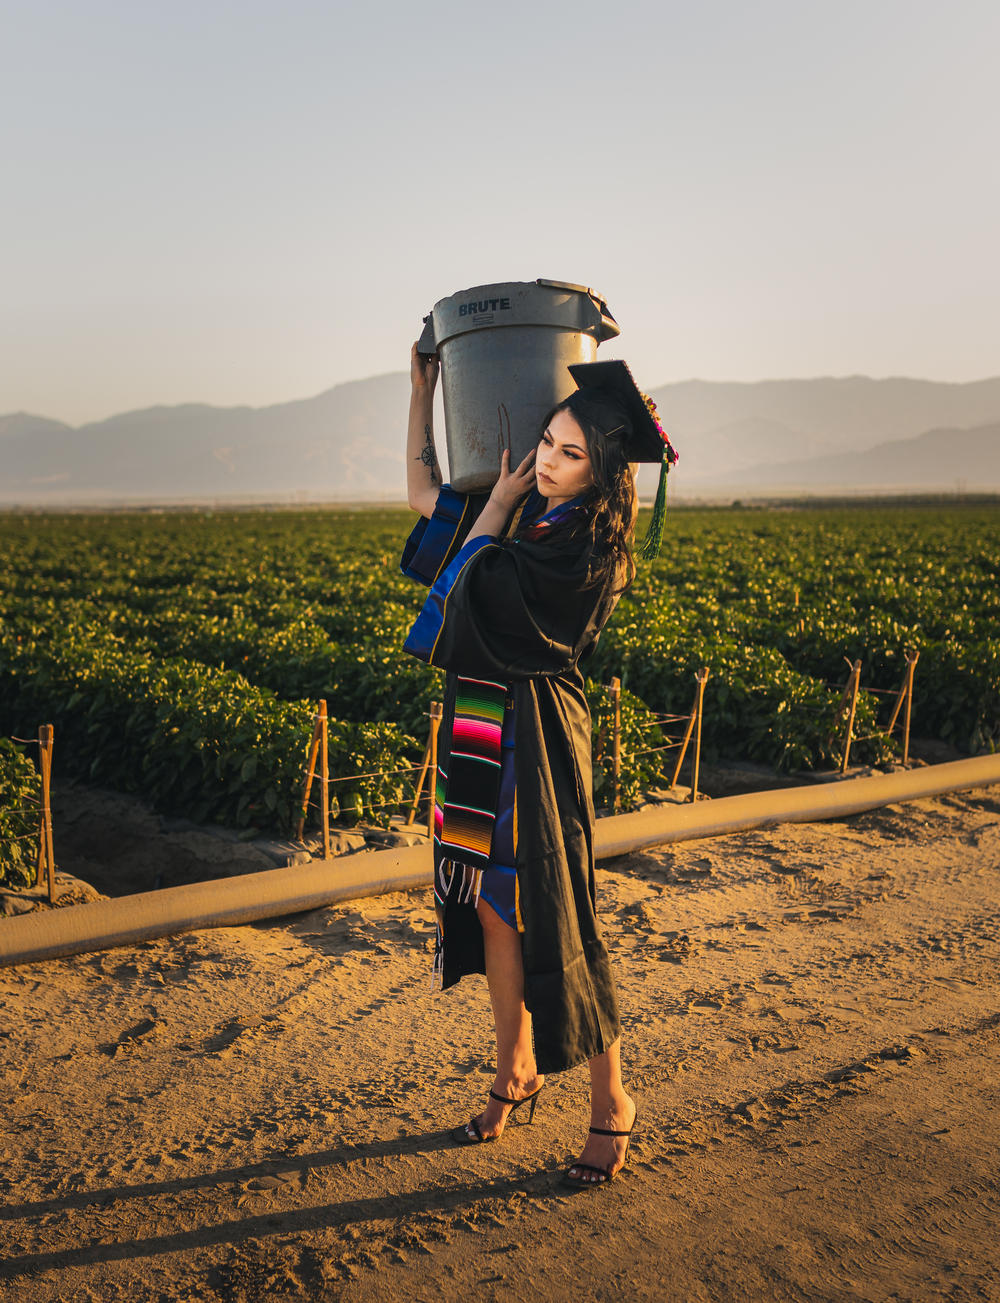 Rocha began working in the fields in Coachella, Calif., when she was a junior in high school. She continued the exhausting work through college.